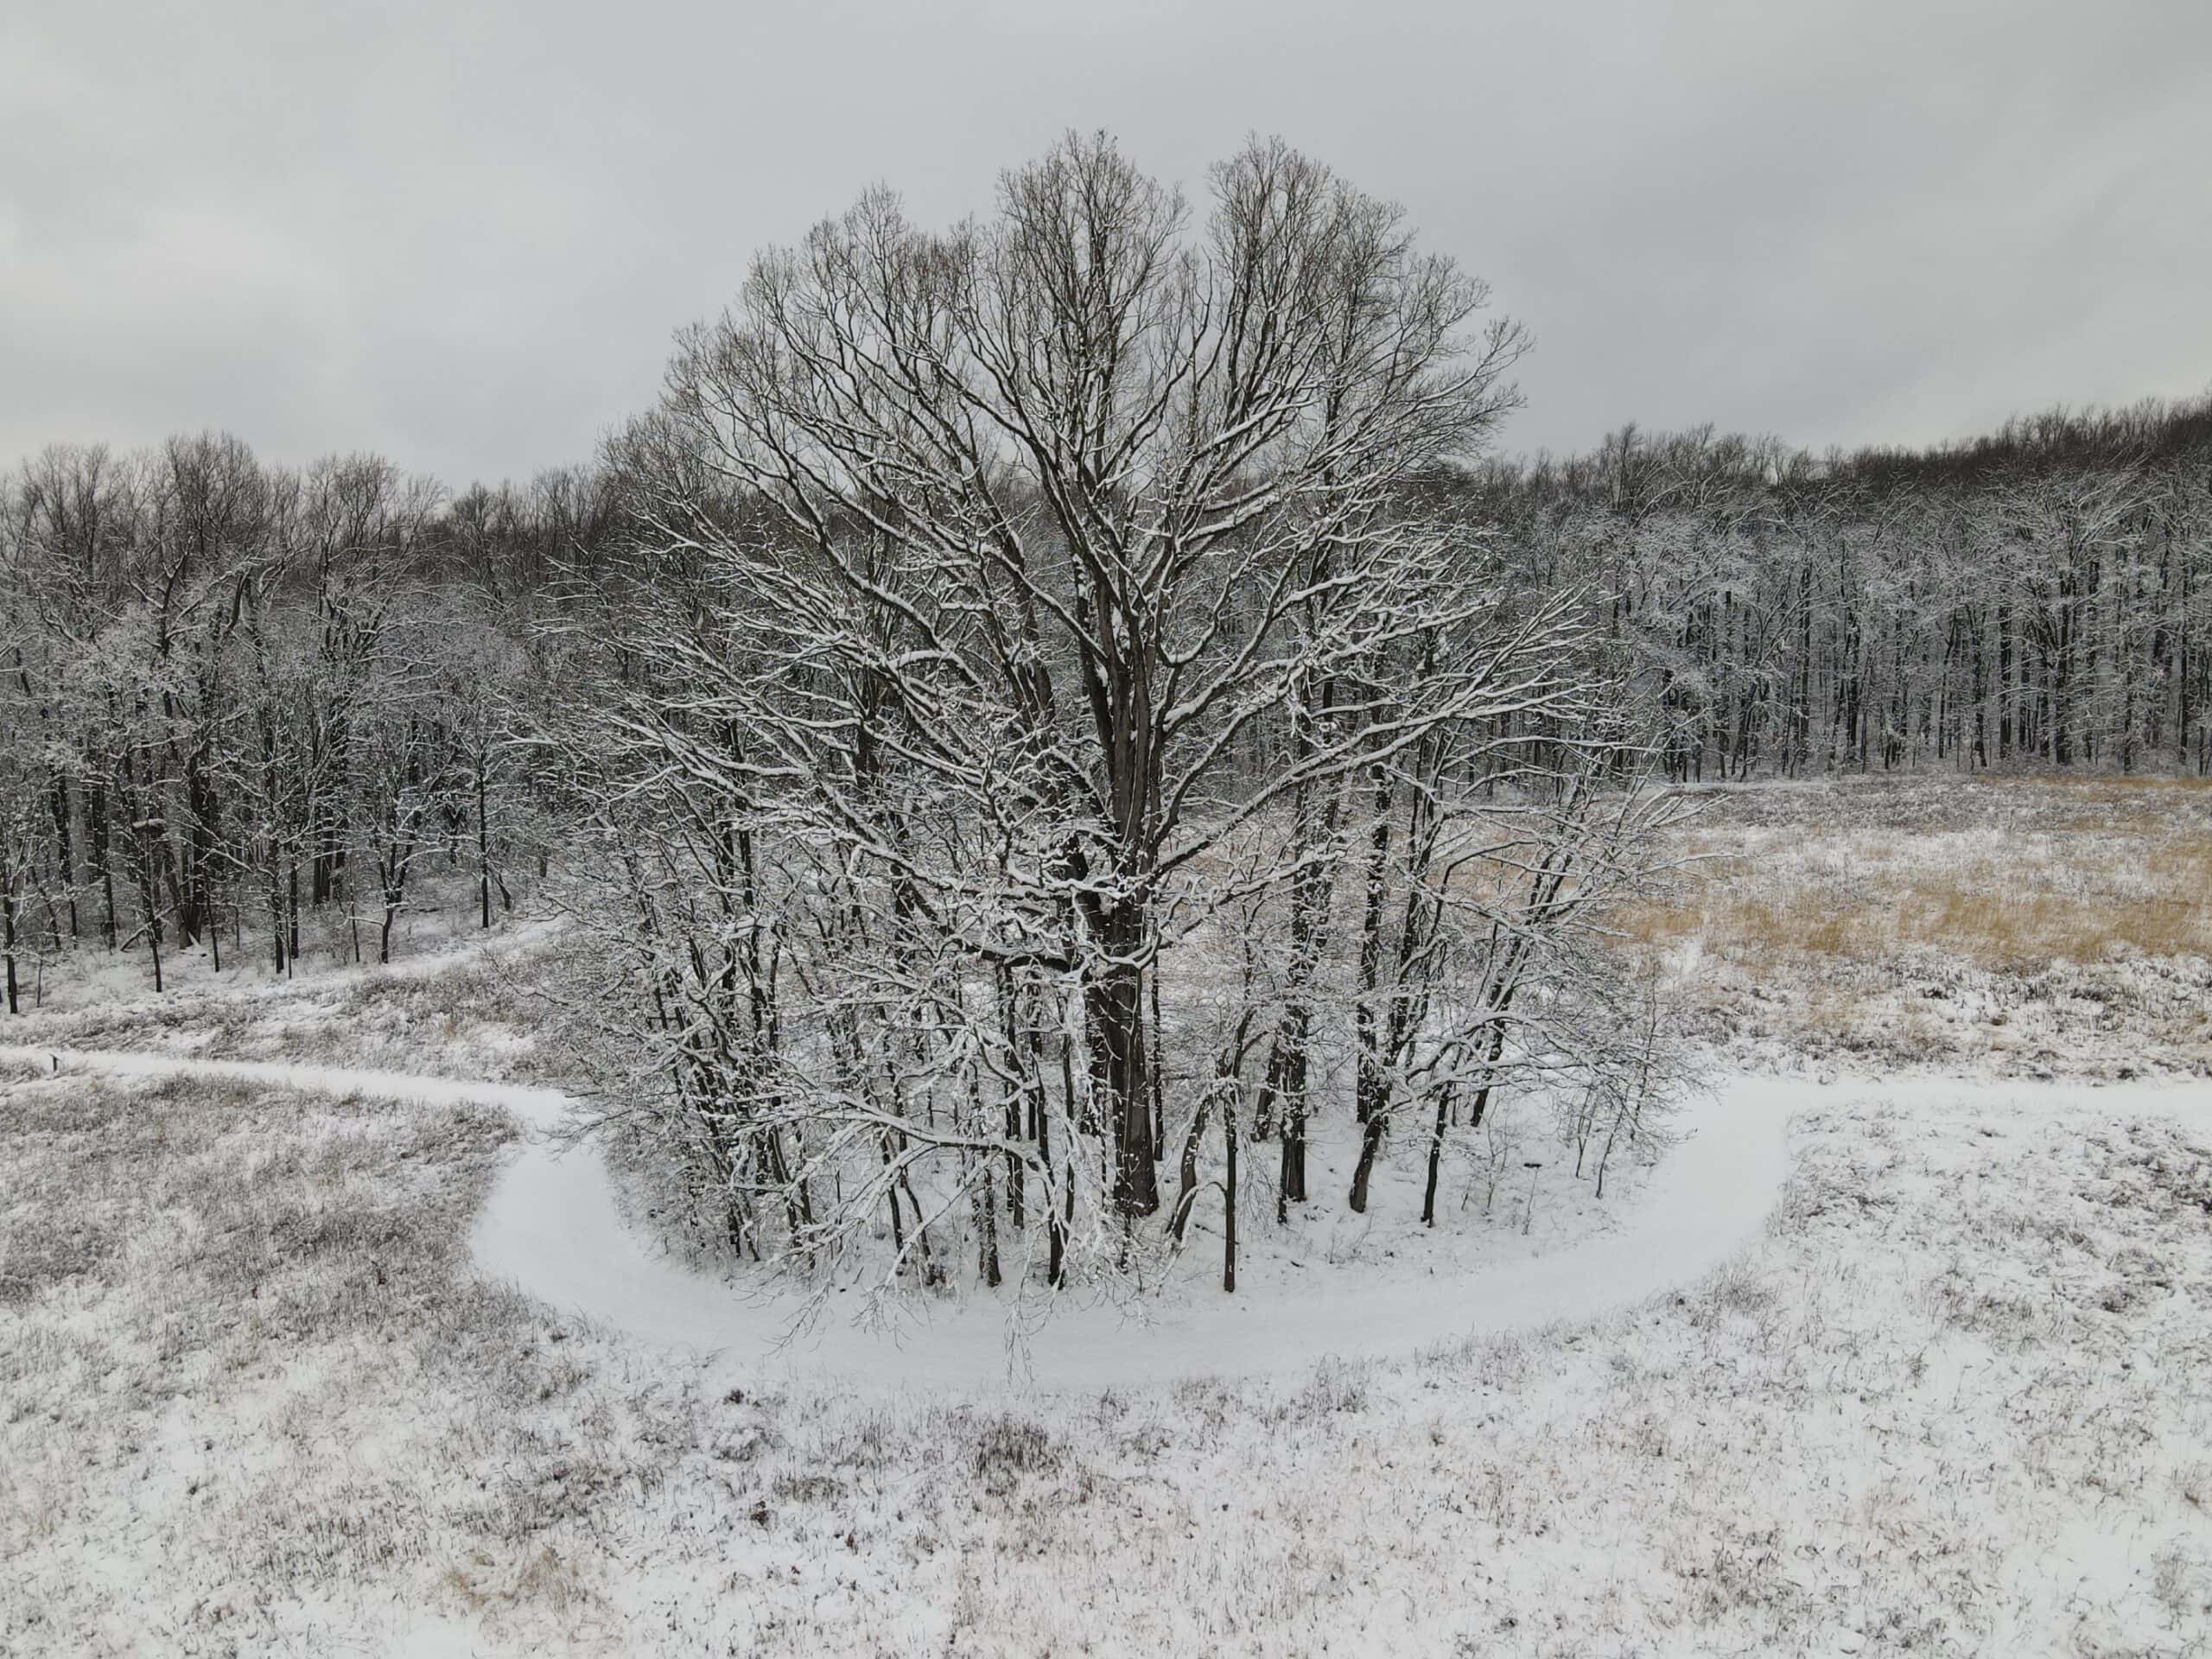 A grove of trees in a snowy meadow